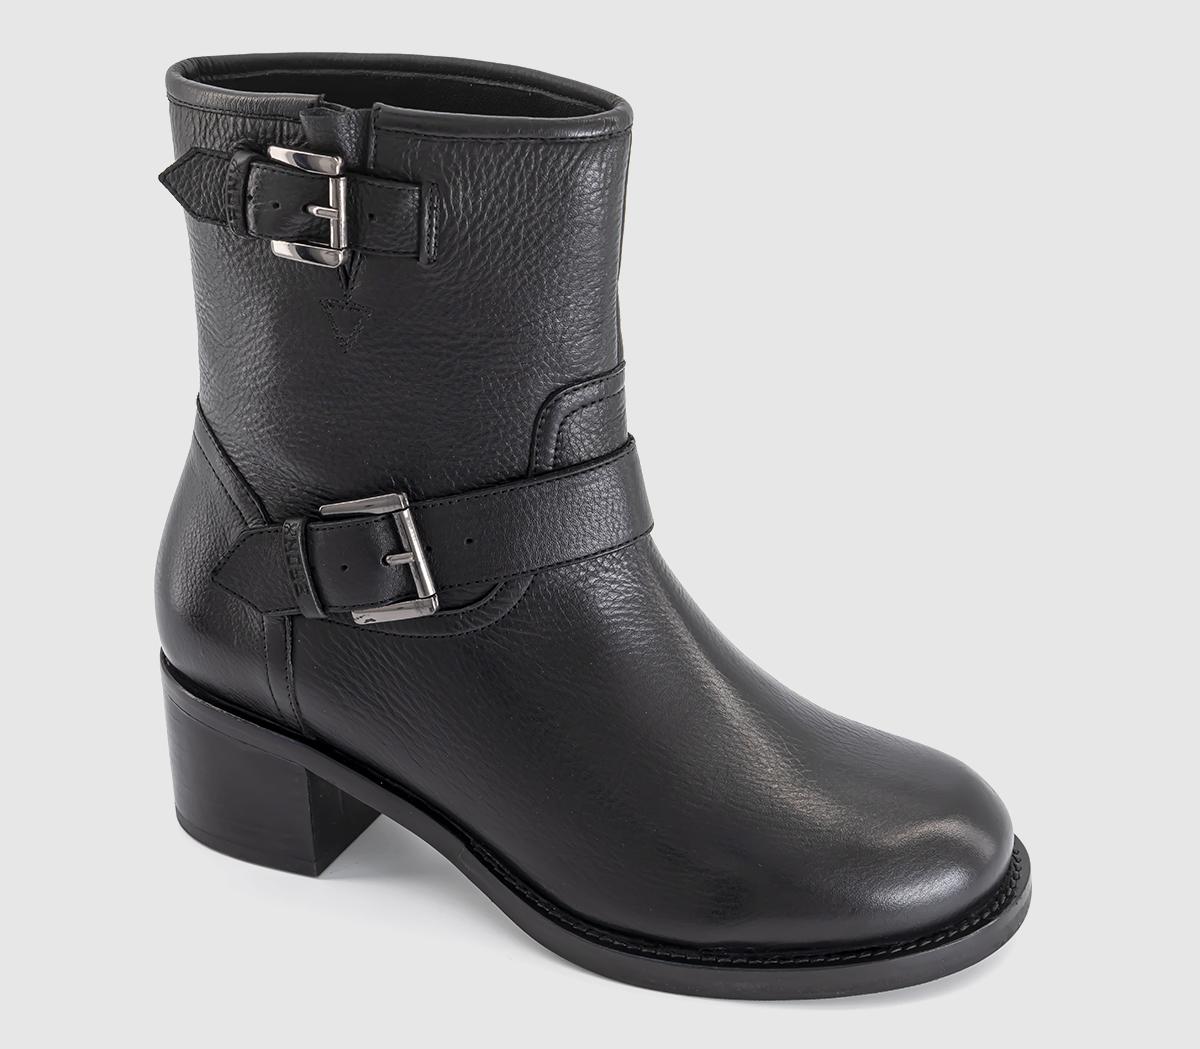 BRONX Camperos Buckle Boots Black - Women's Ankle Boots